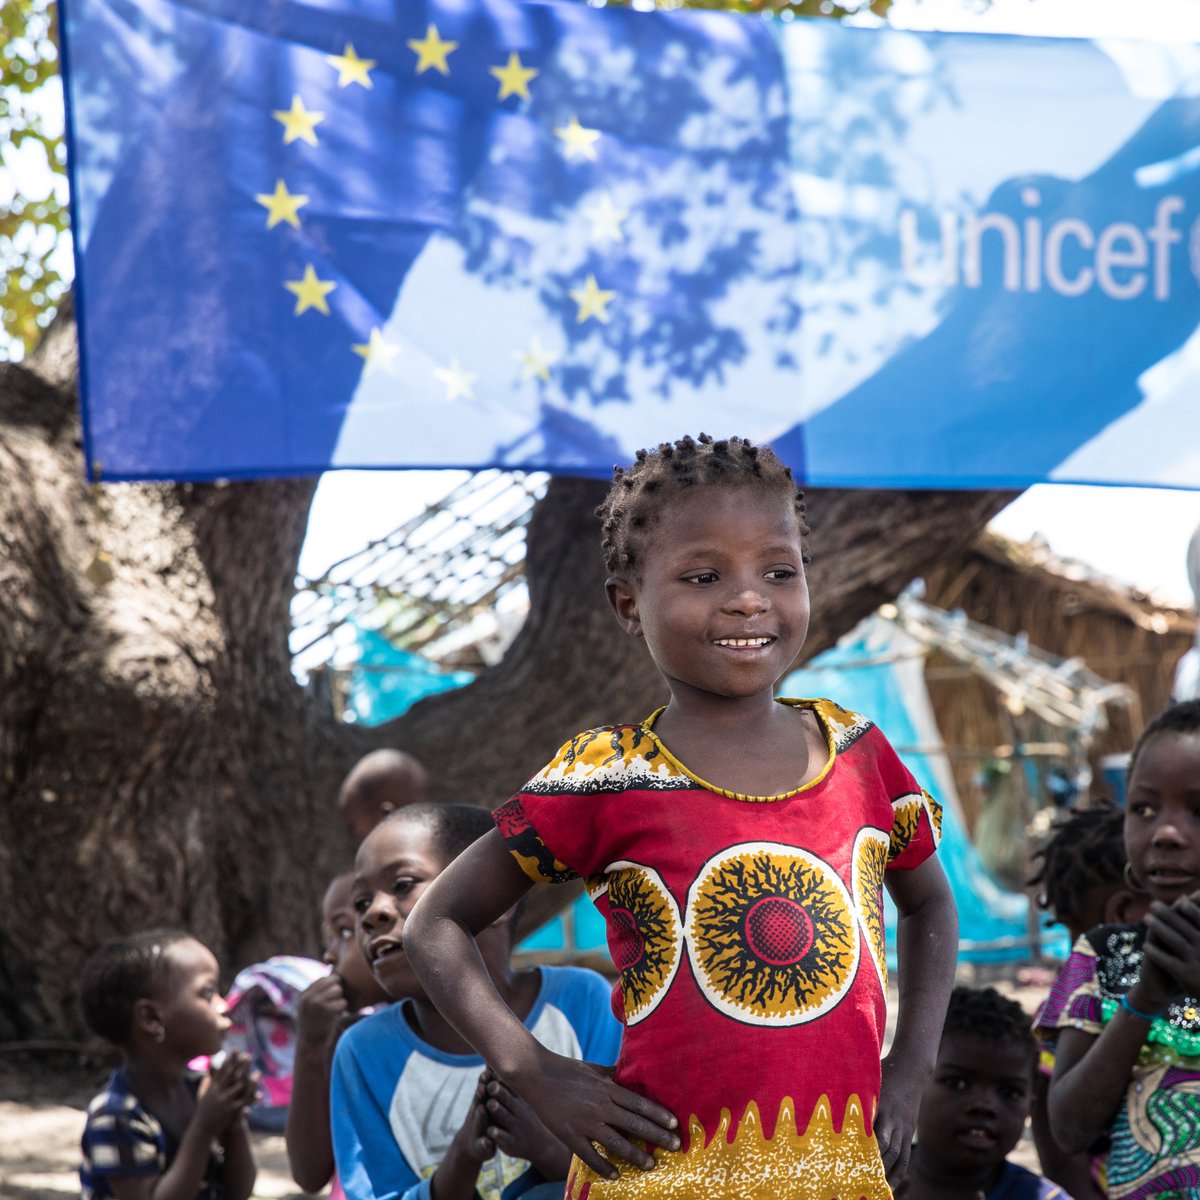 On #EuropeDay, we thank the European Union 🇪🇺 countries for supporting our work with children & families in #Mozambique, especially in the areas of protection, water, health & nutrition that helped create solutions for children & families to have better and safer lives.